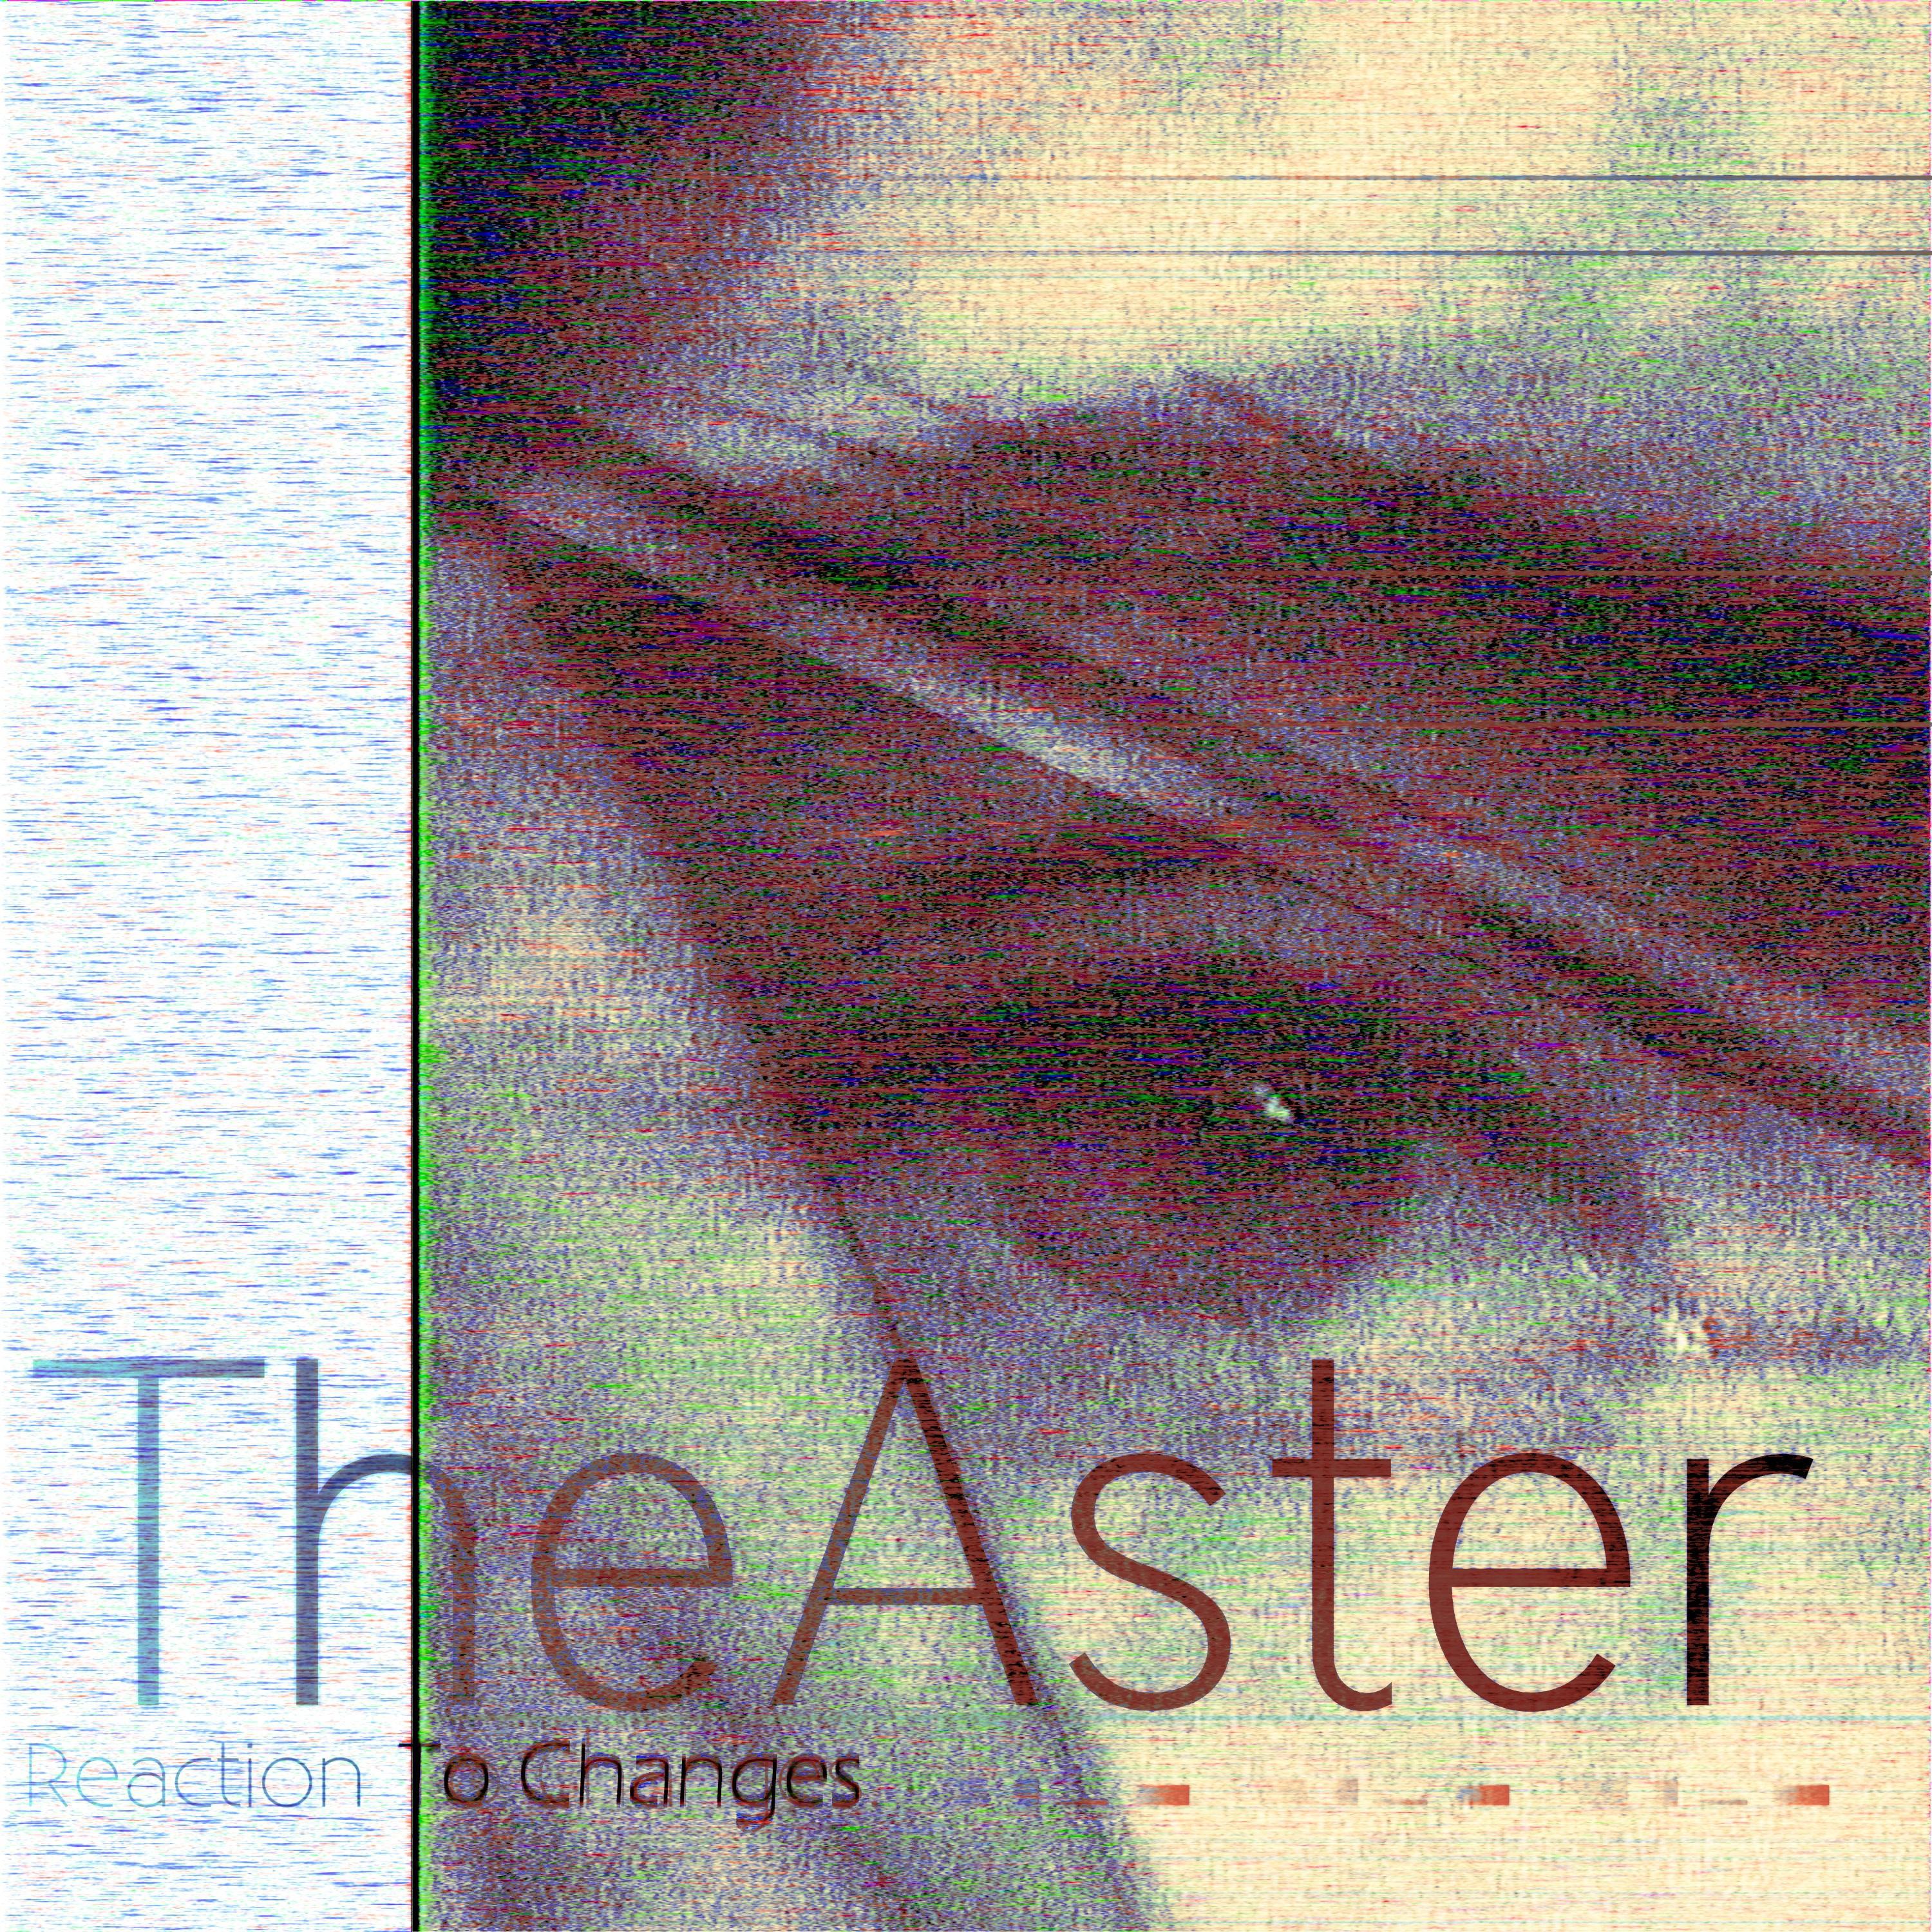 Theaster - Fortification